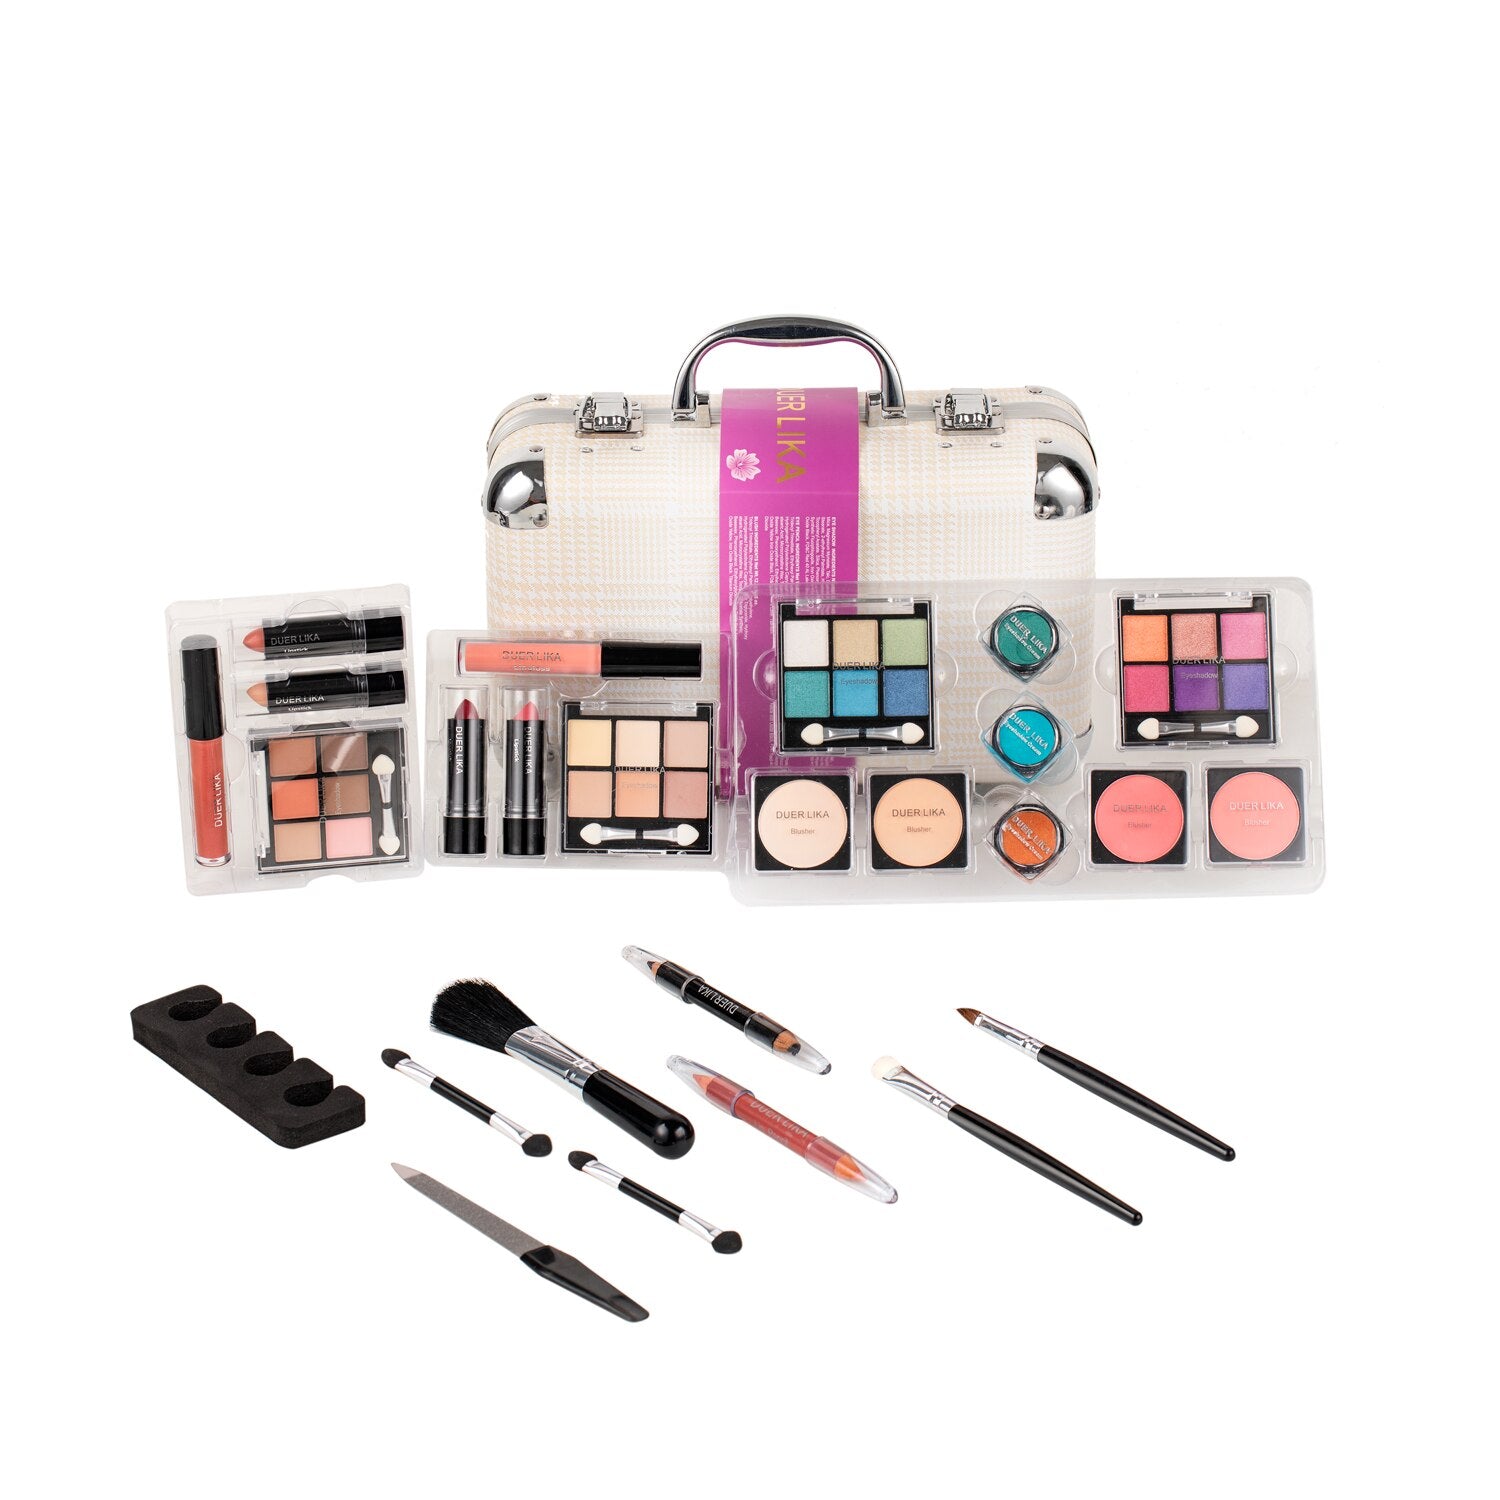 Professional 24 Color Eyeshadow Blush Makeup Set Train Case with Pro Make Up Kit and Reusable Aluminum Box